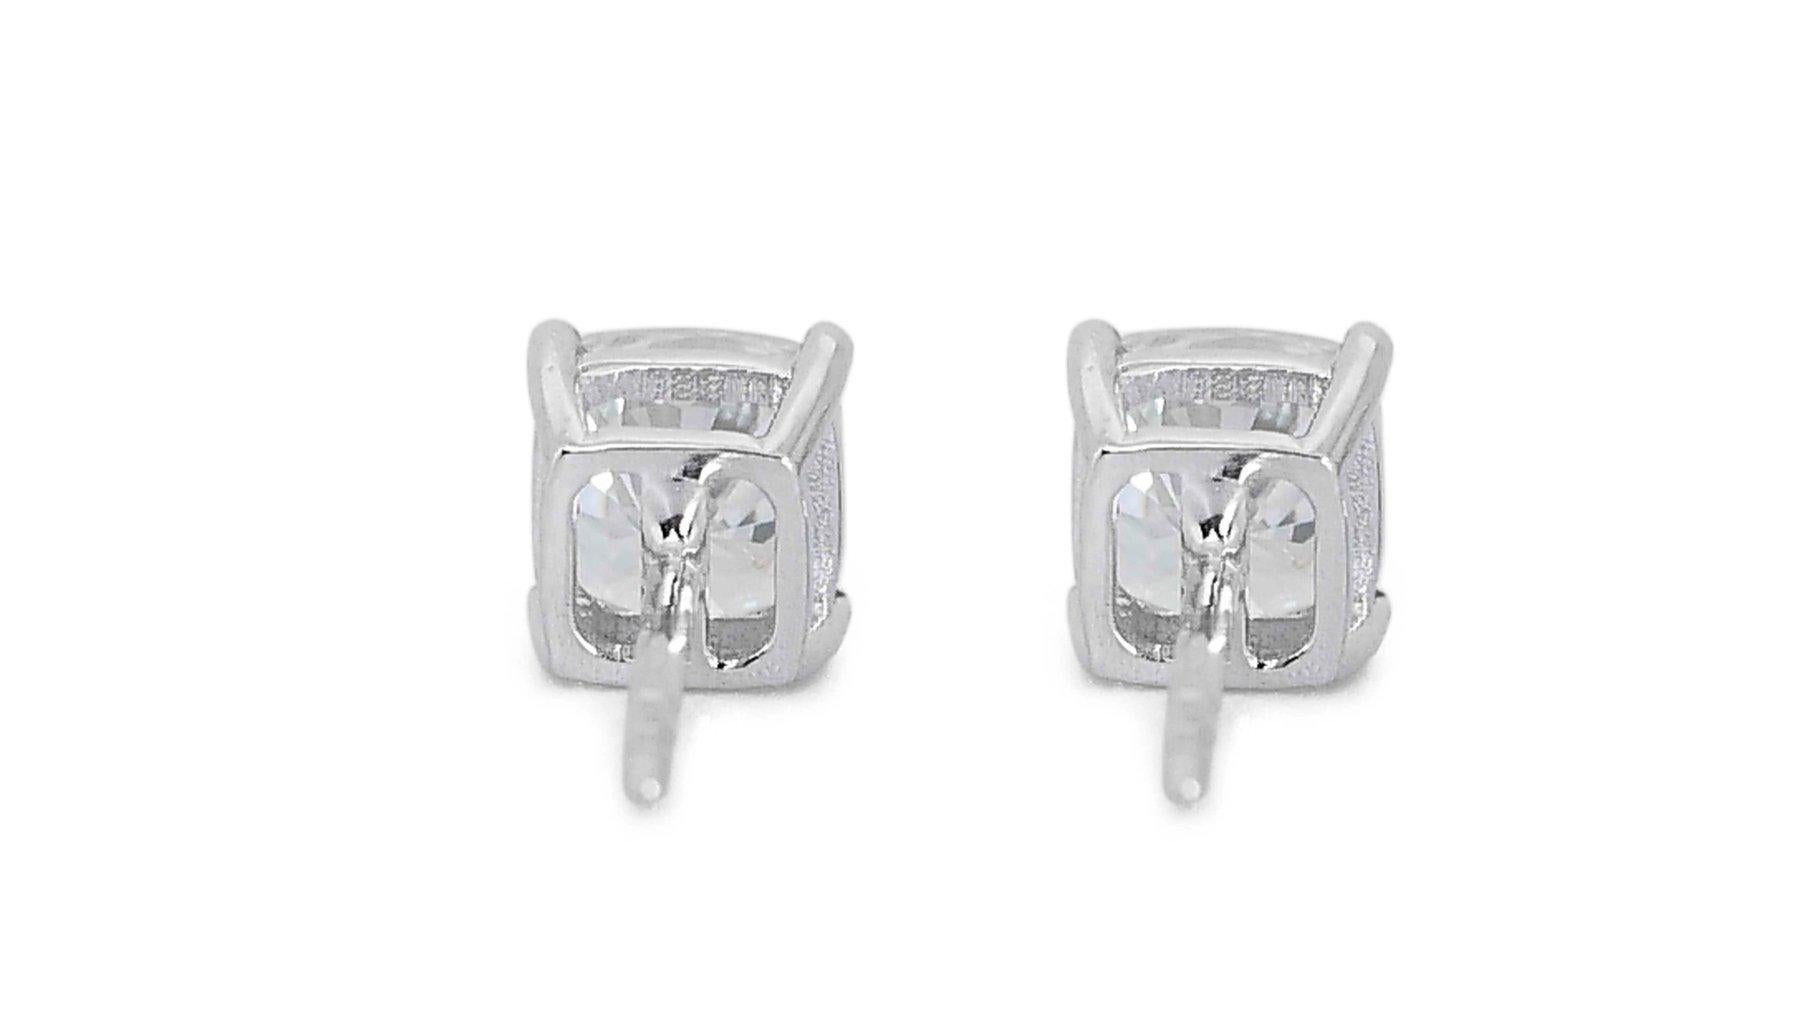 Dazzling Pair of 18K White Gold Earrings with 2.06 Carat Square Diamond For Sale 3